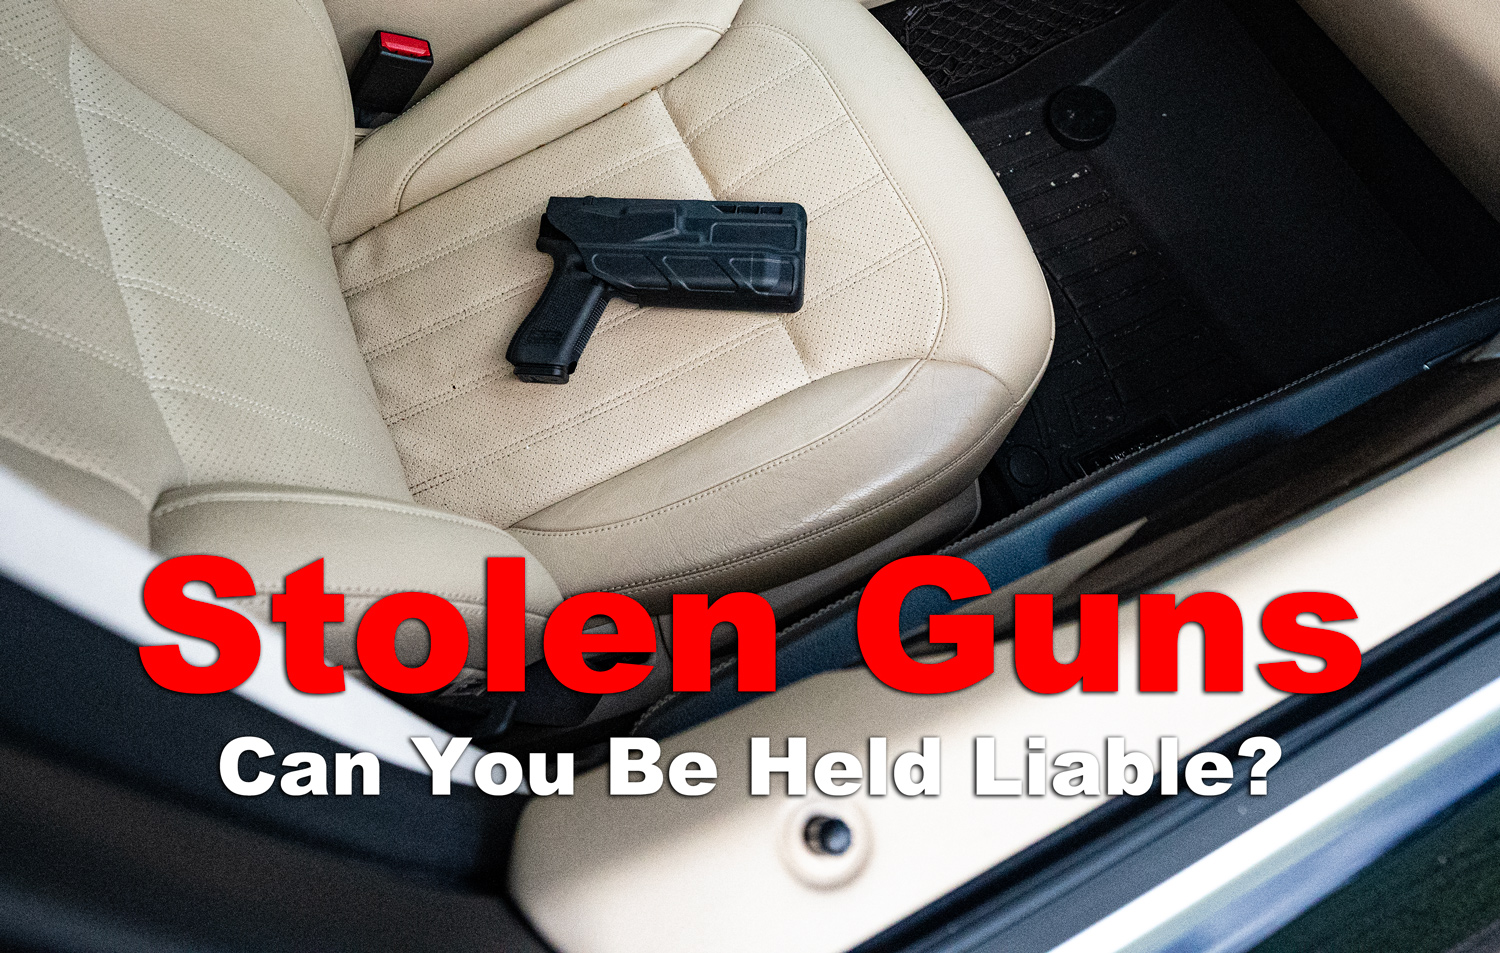 A potential stolen gun left unattended in the front seat of a vehicle